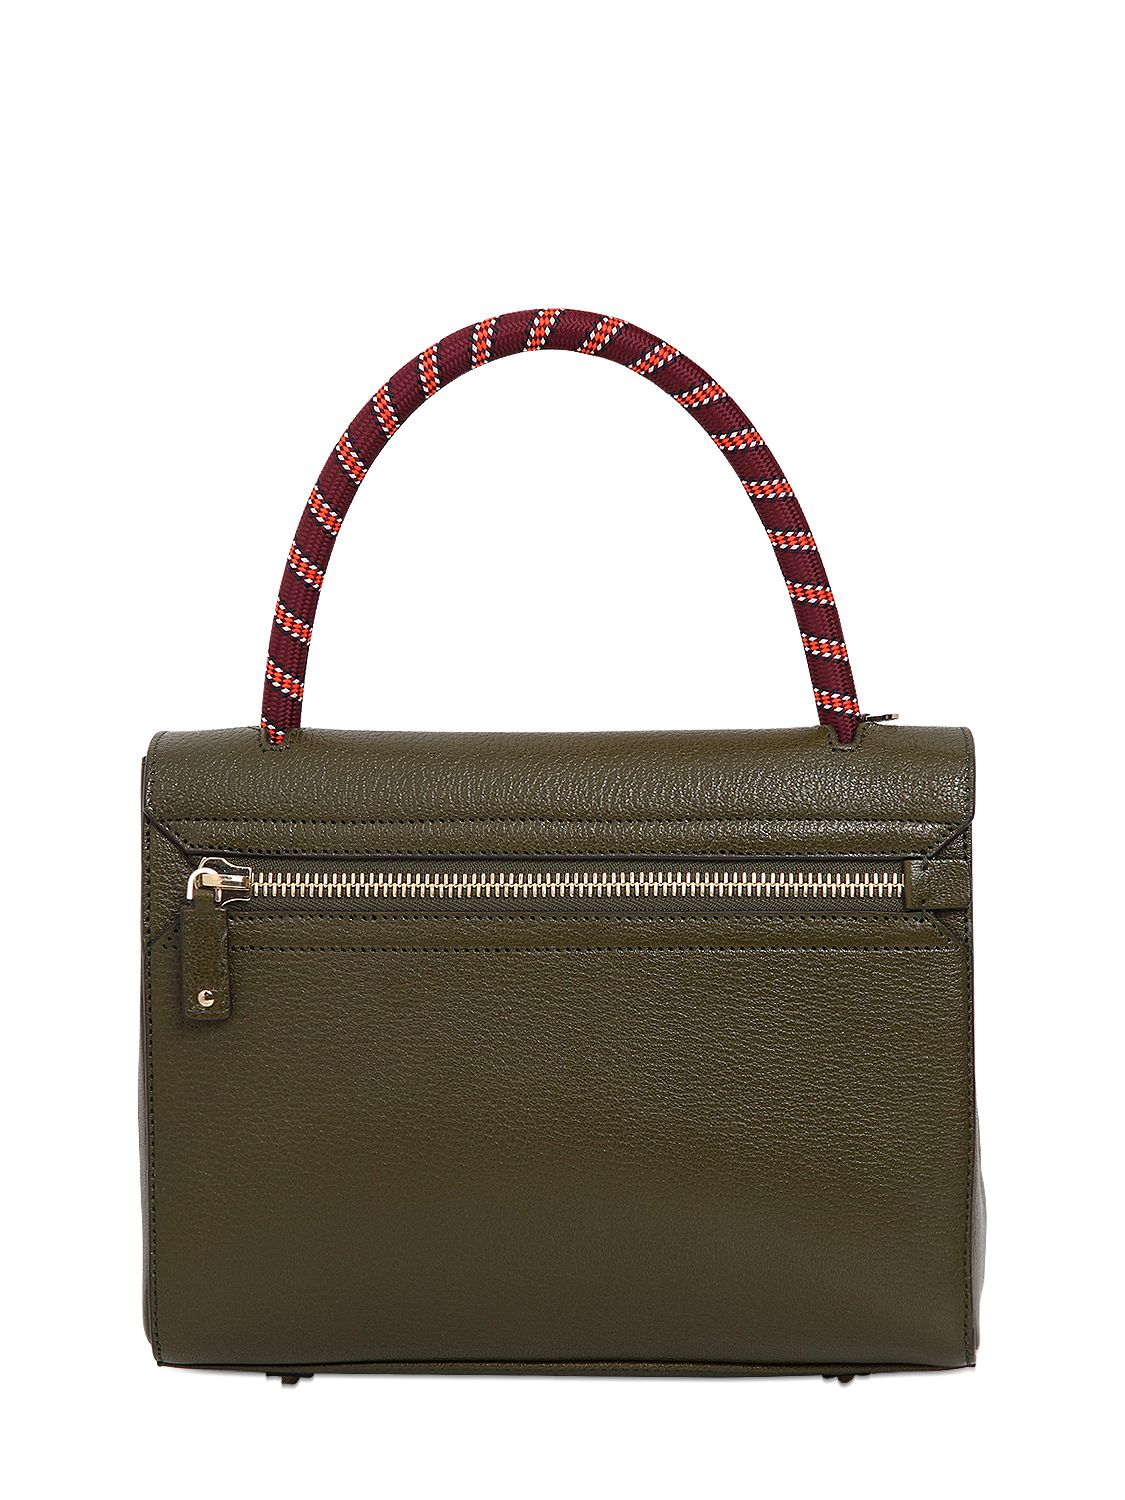 Anya Hindmarch Bathurst Go Leather Top Handle Bag in Olive Green (Green ...